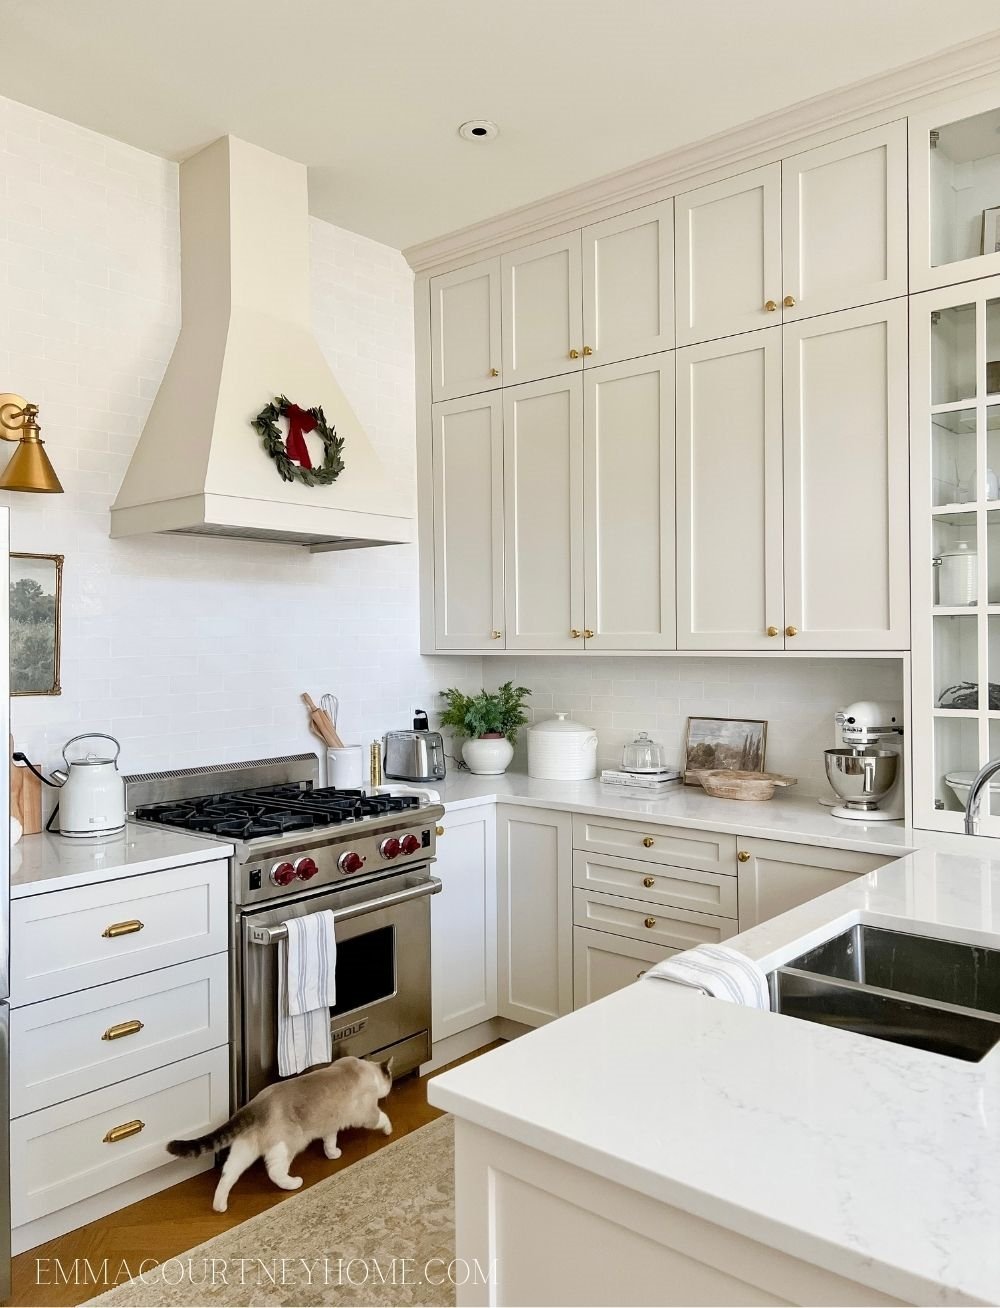 A kitchen with cabinets painted in Benjamin Moore Natural Cream